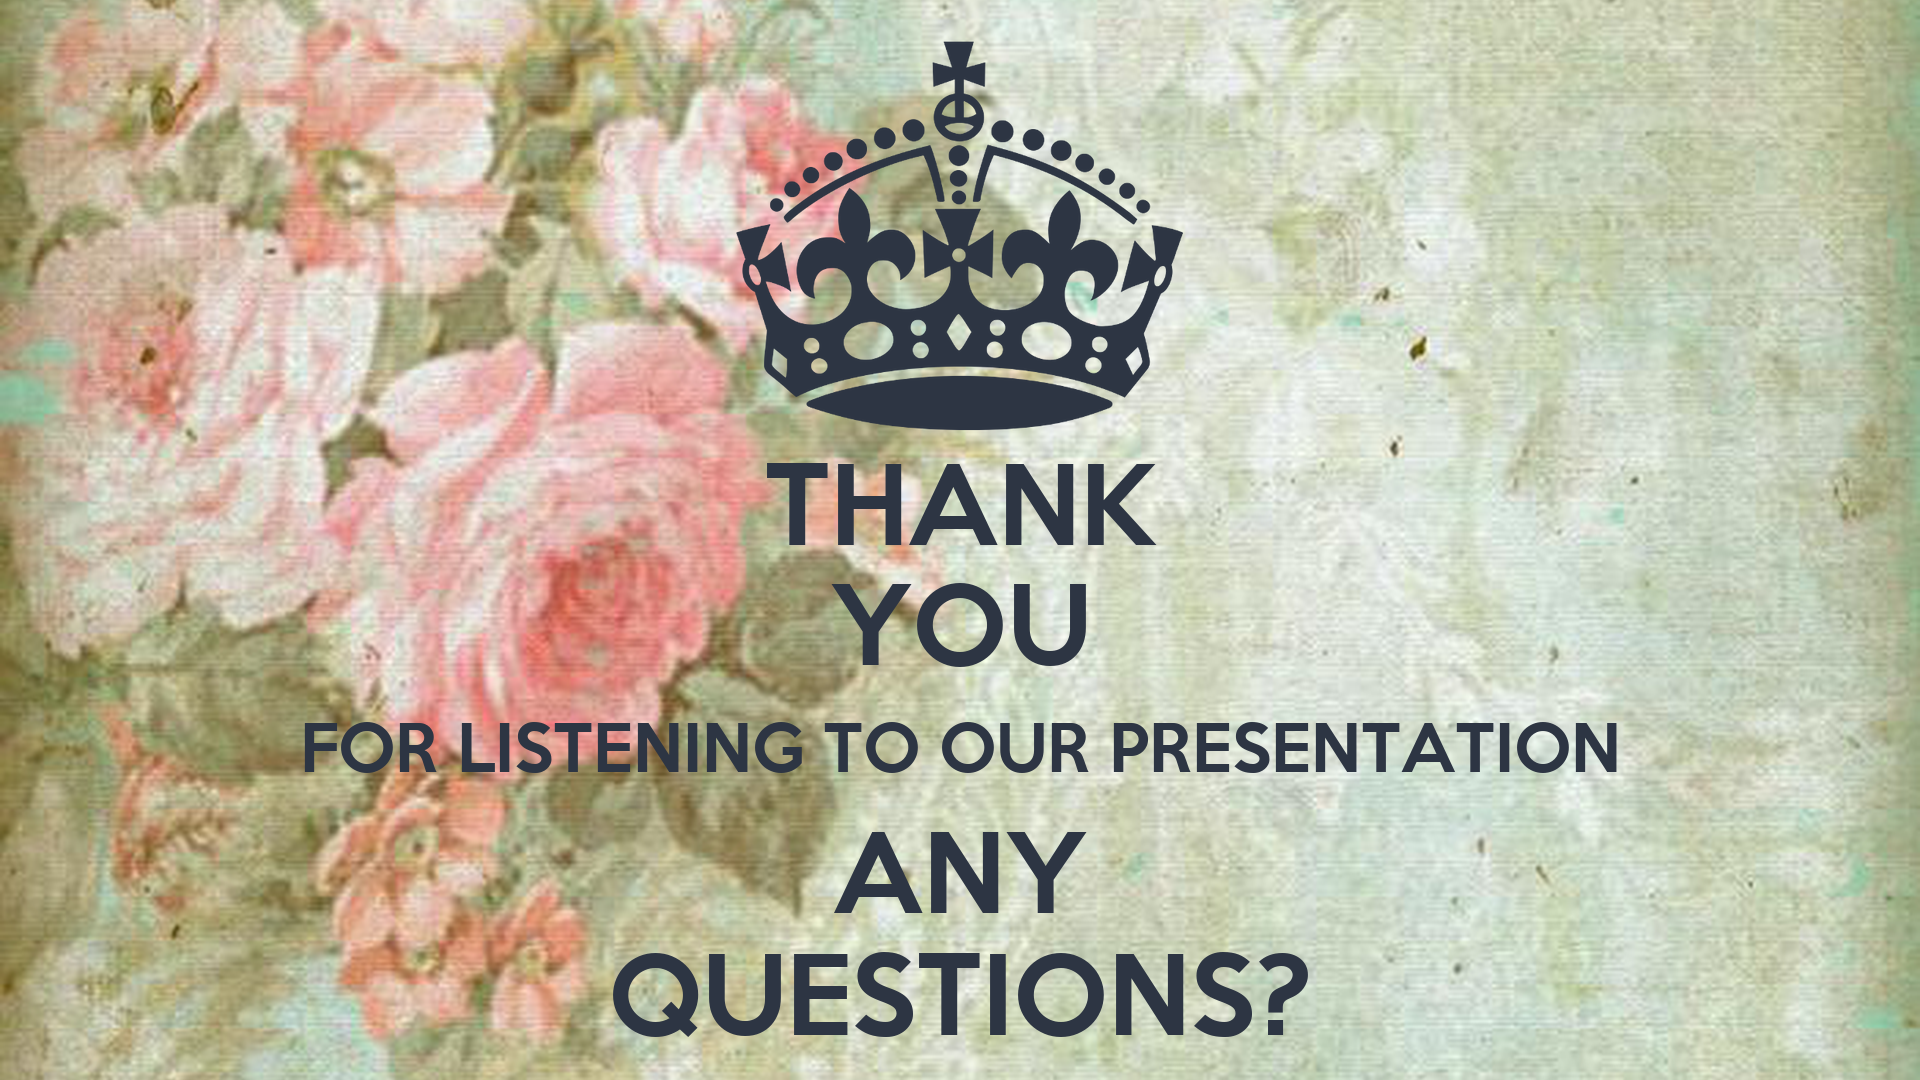 THANK YOU FOR LISTENING TO OUR PRESENTATION ANY QUESTIONS? Poster. Sajjadgabbrial. Keep Calm O Matic